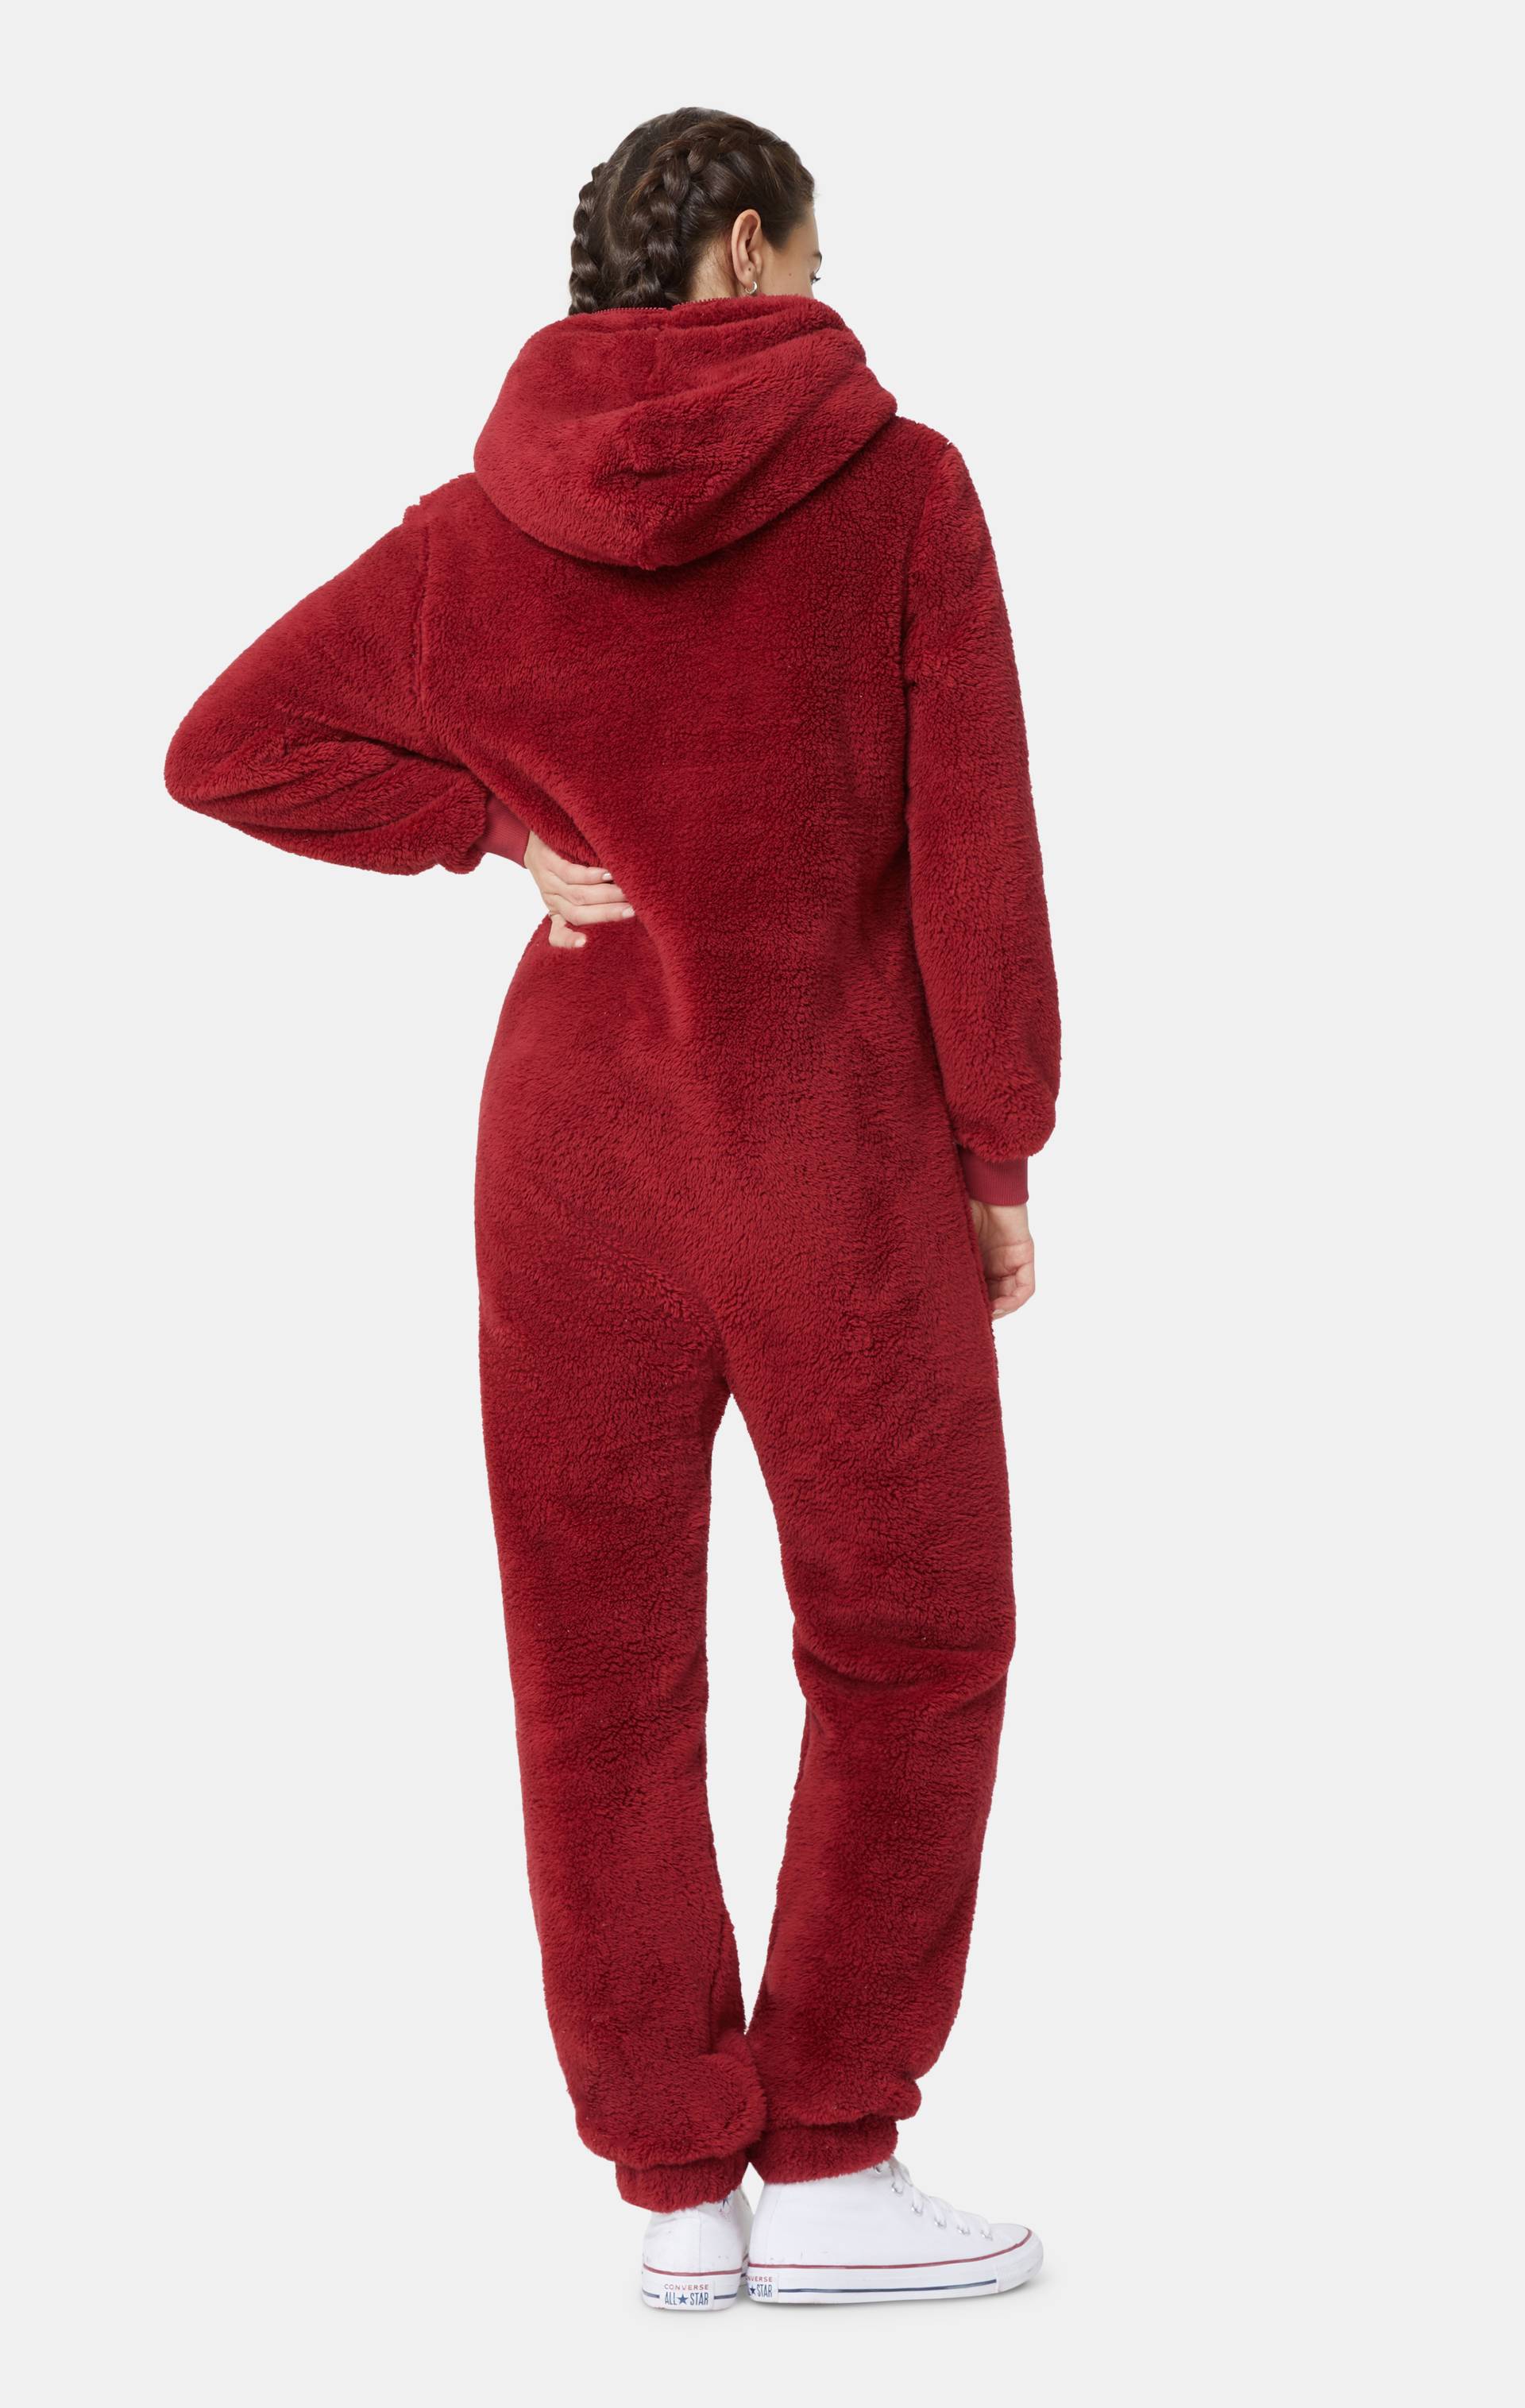 Onepiece The Puppy Jumpsuit Red - 10